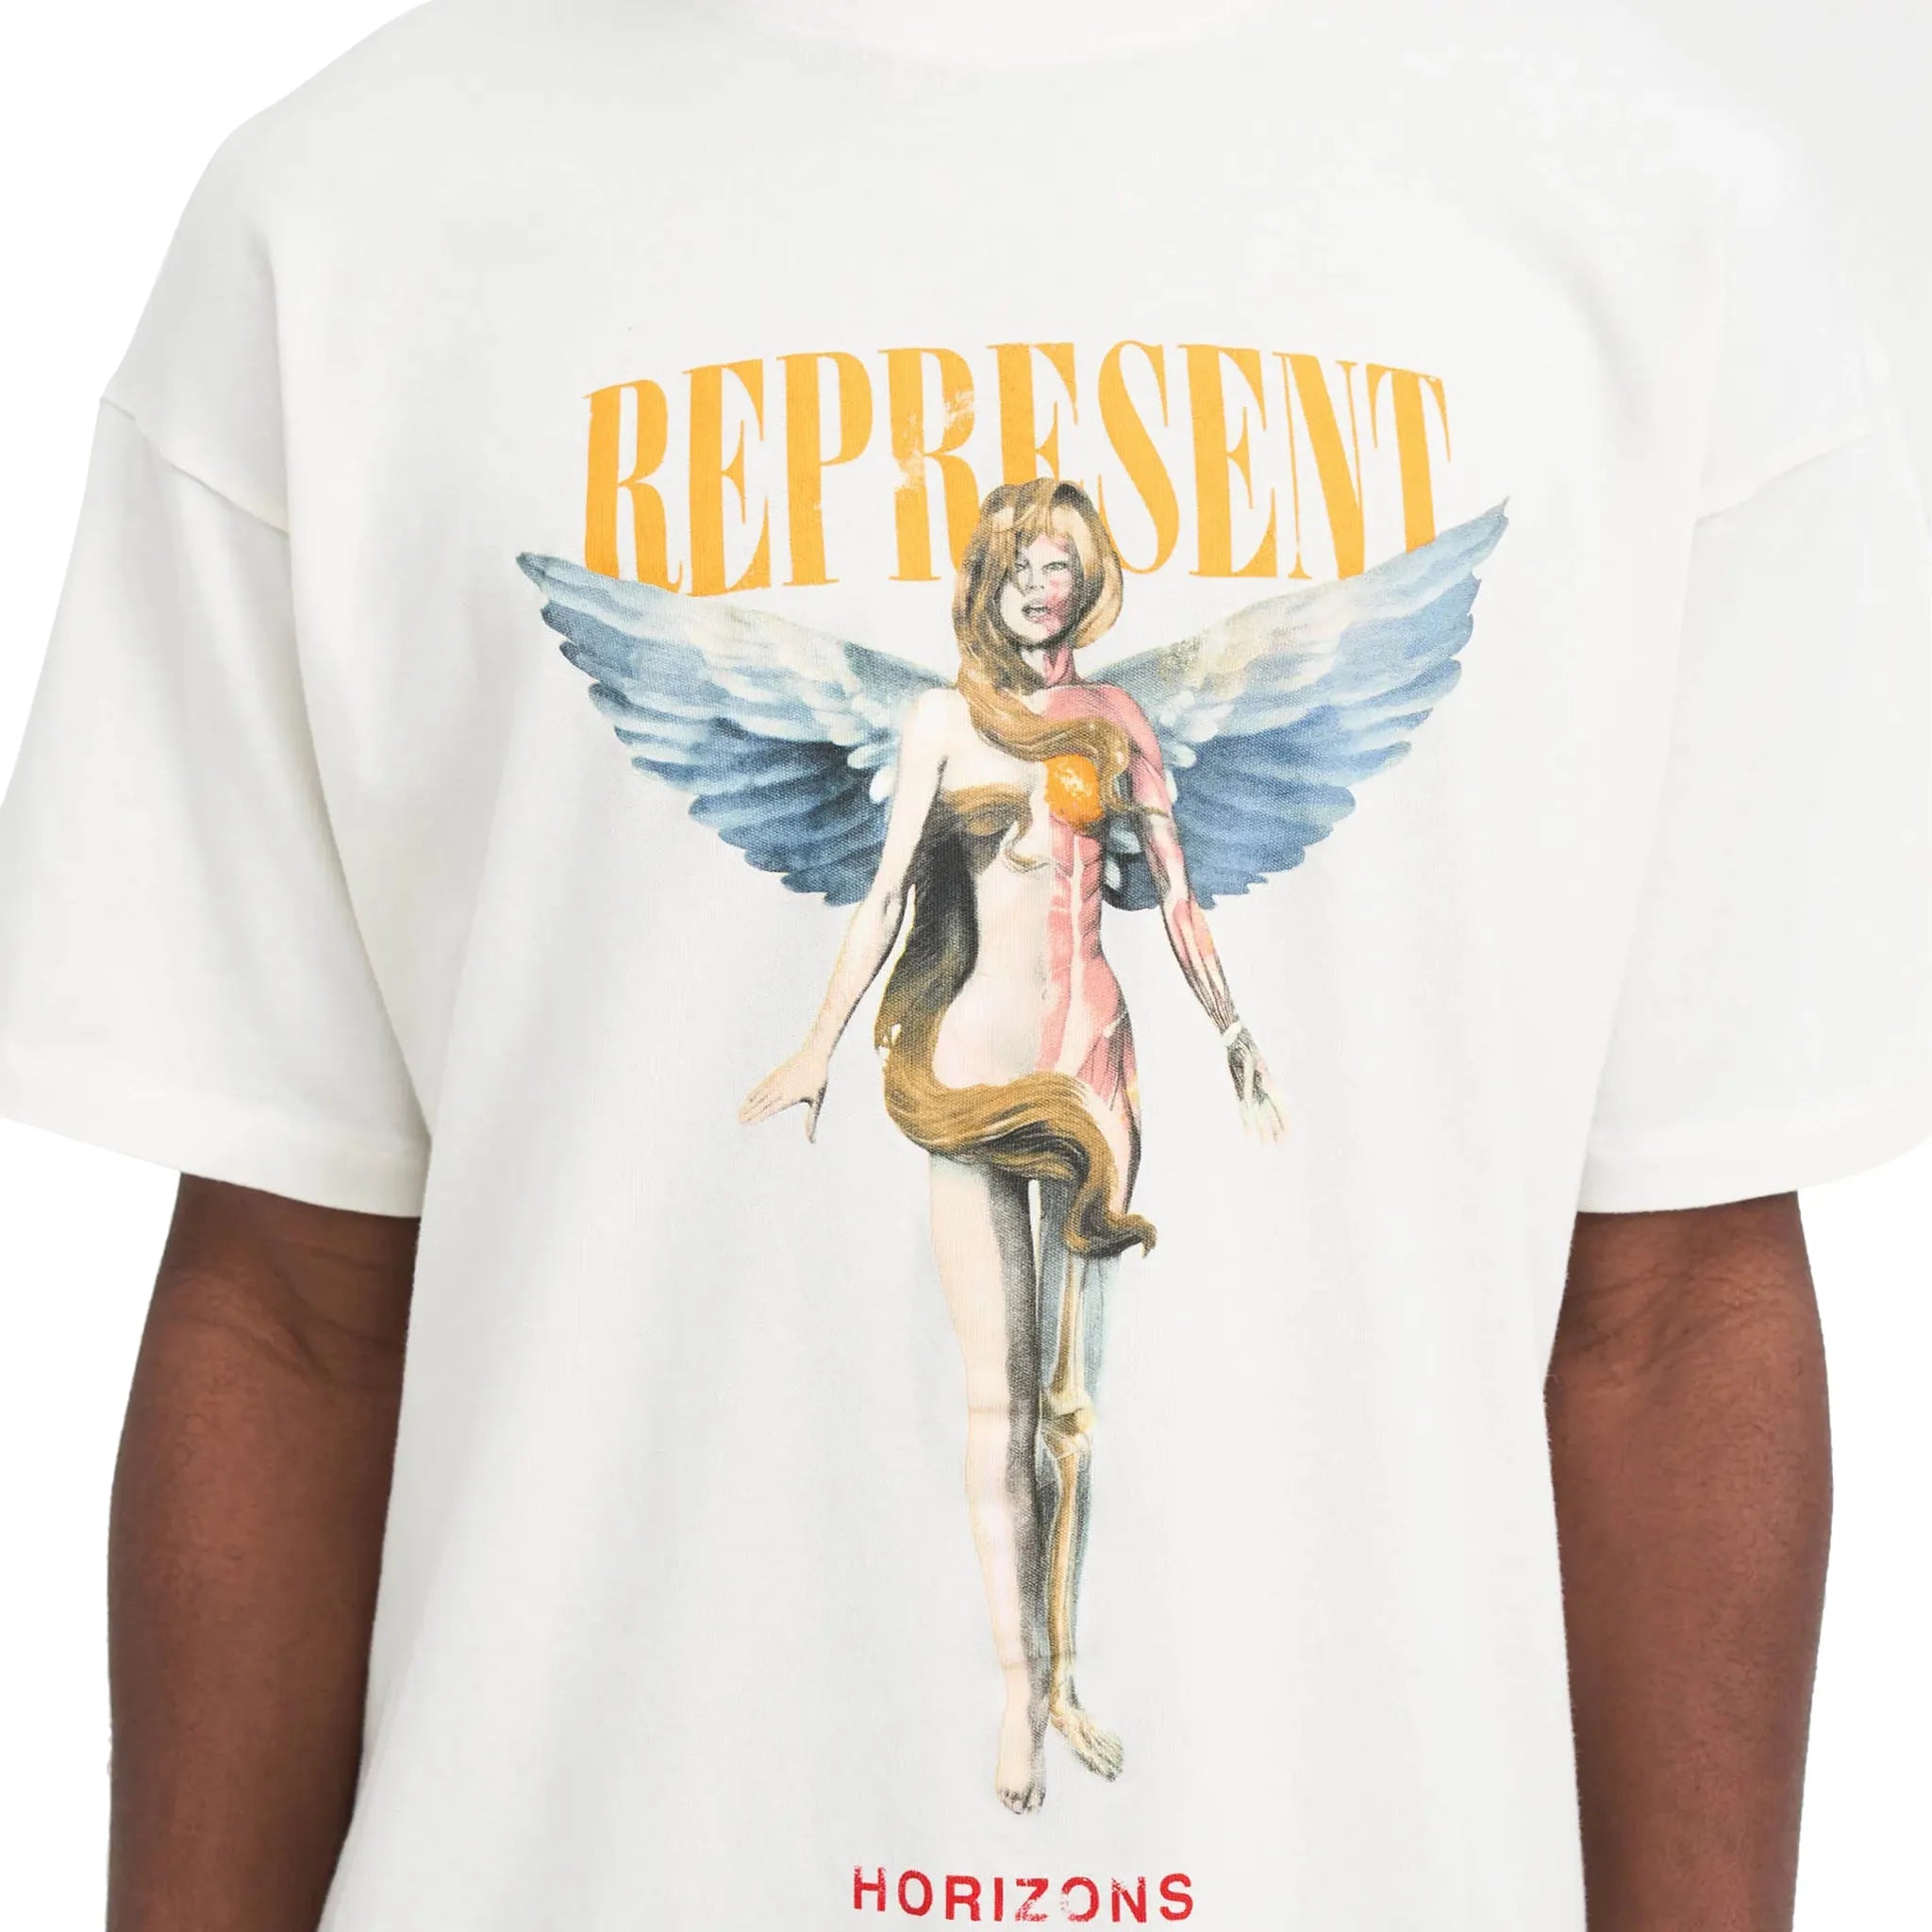 Front Detail view of Represent Rep Reborn Flat White T Shirt MLM434-72